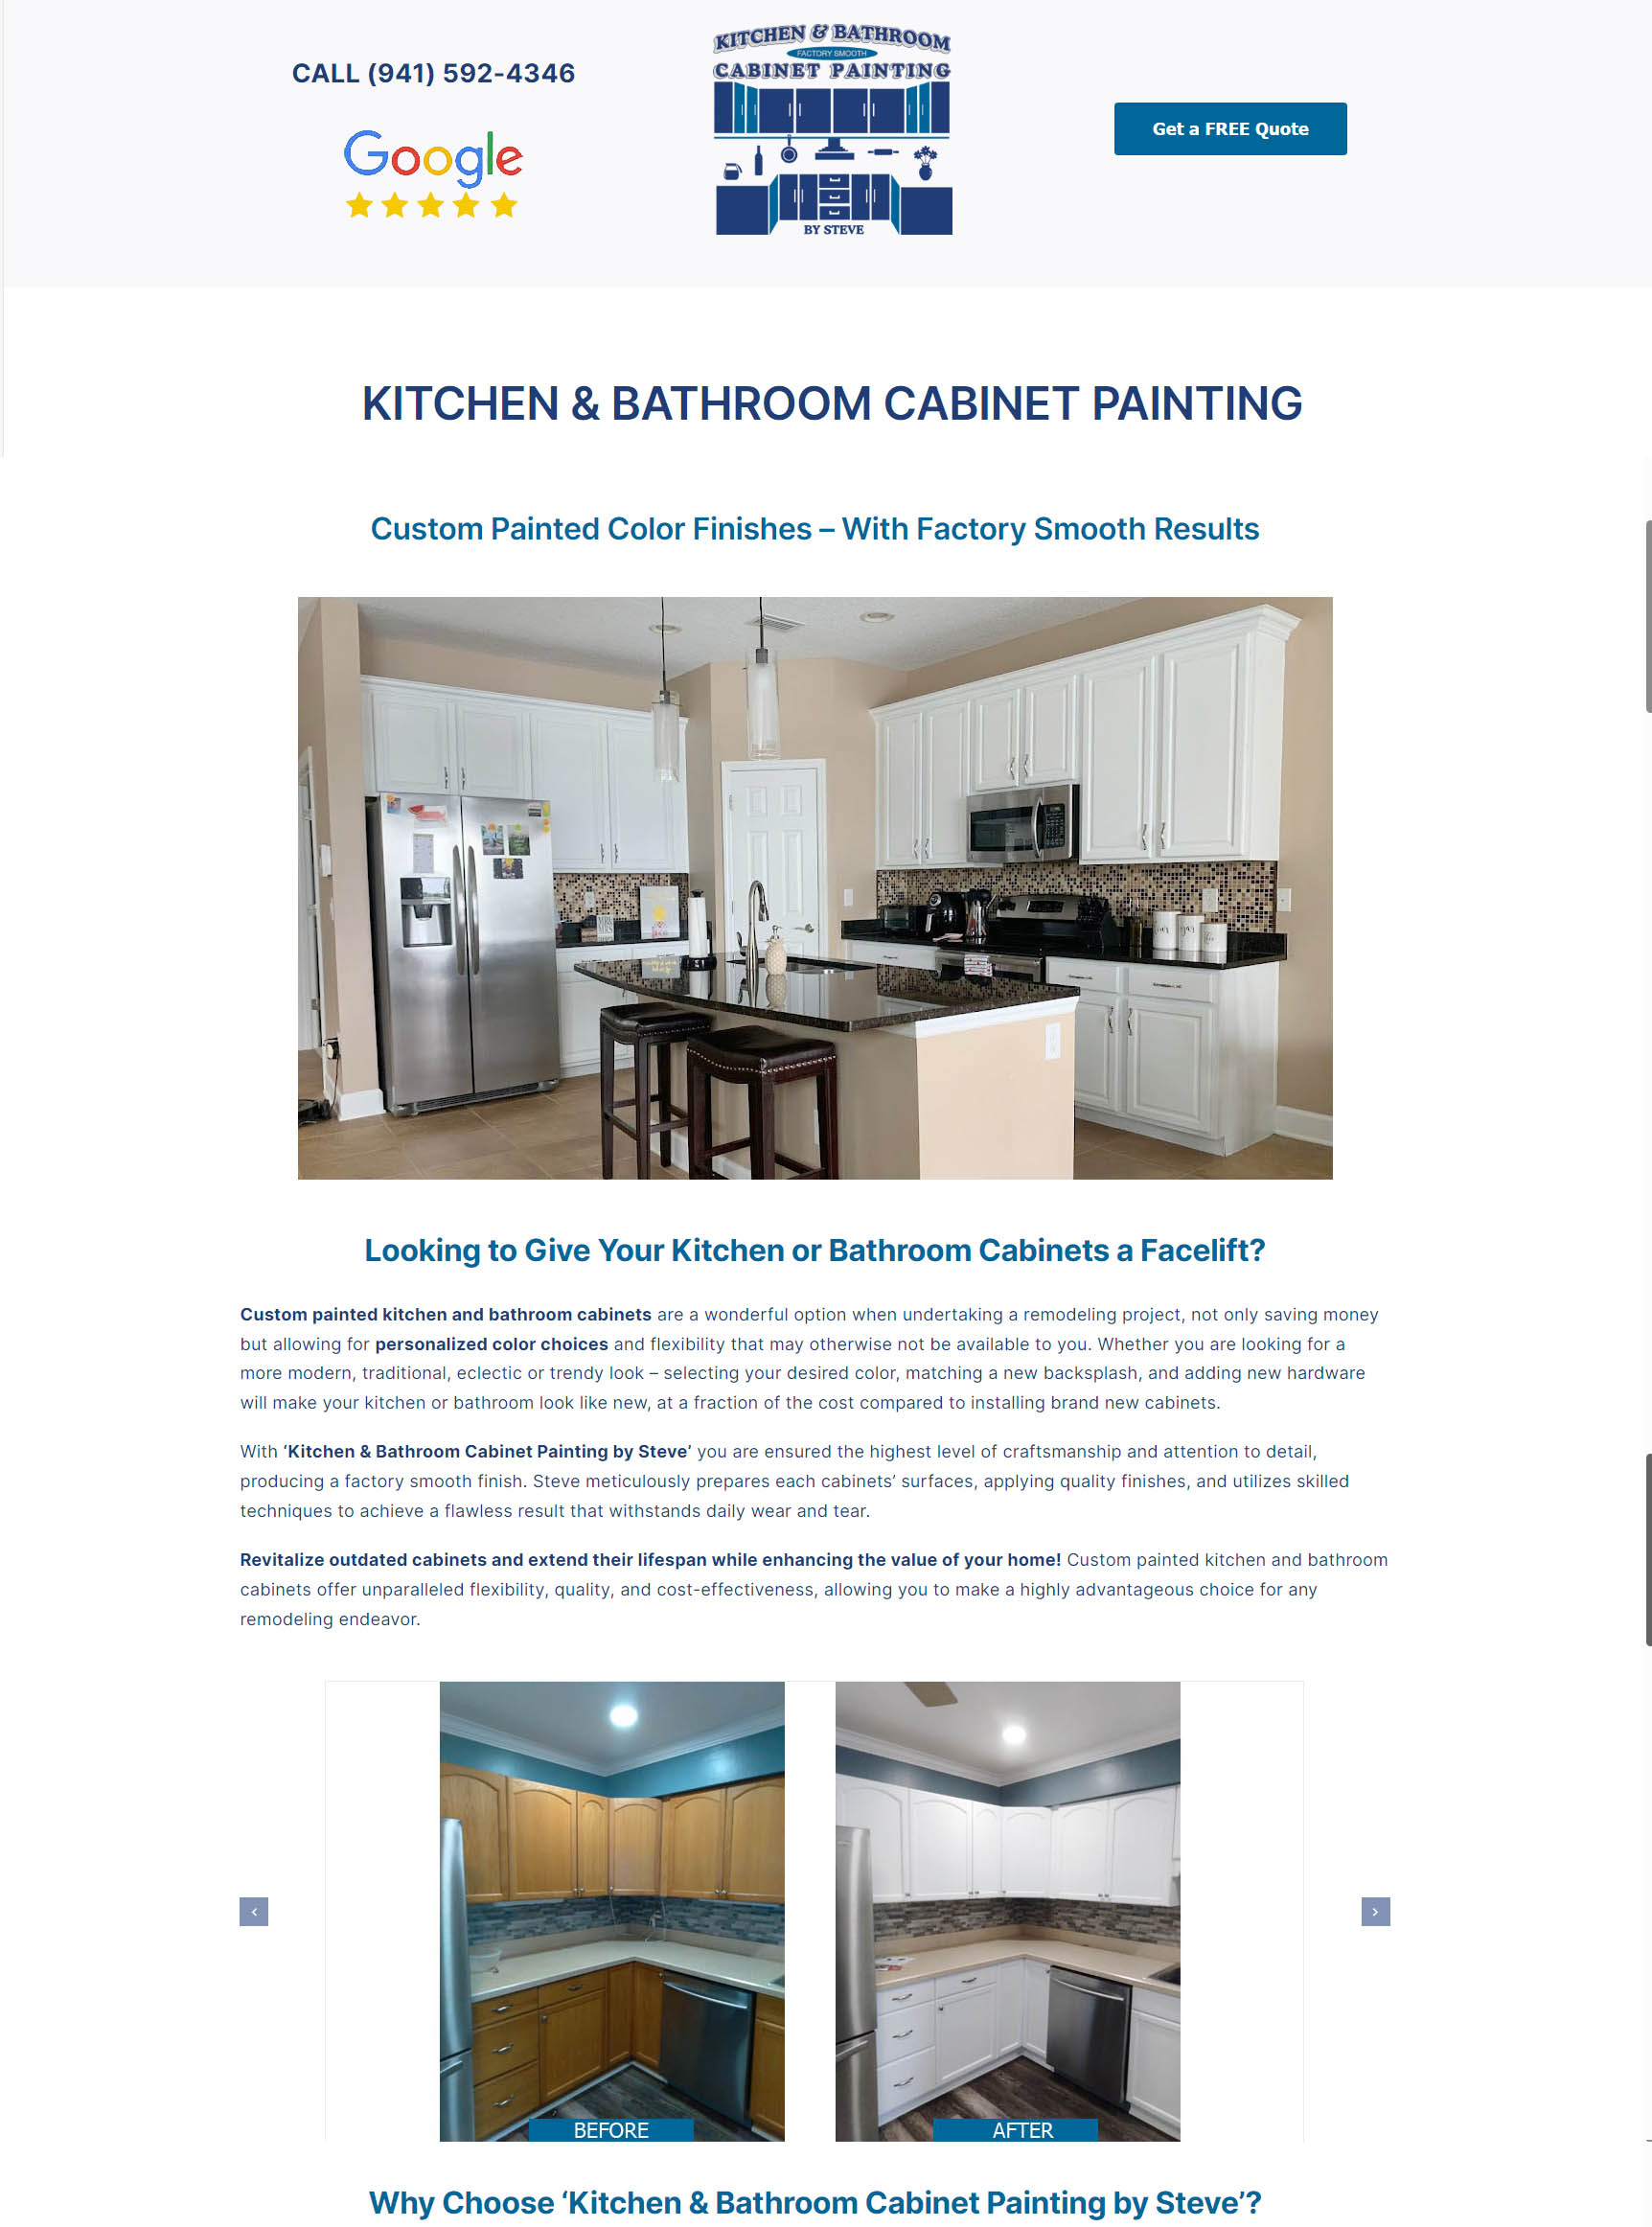 Sarasota web design for Kitchen and Bathroom Cabinet Painting by Steve